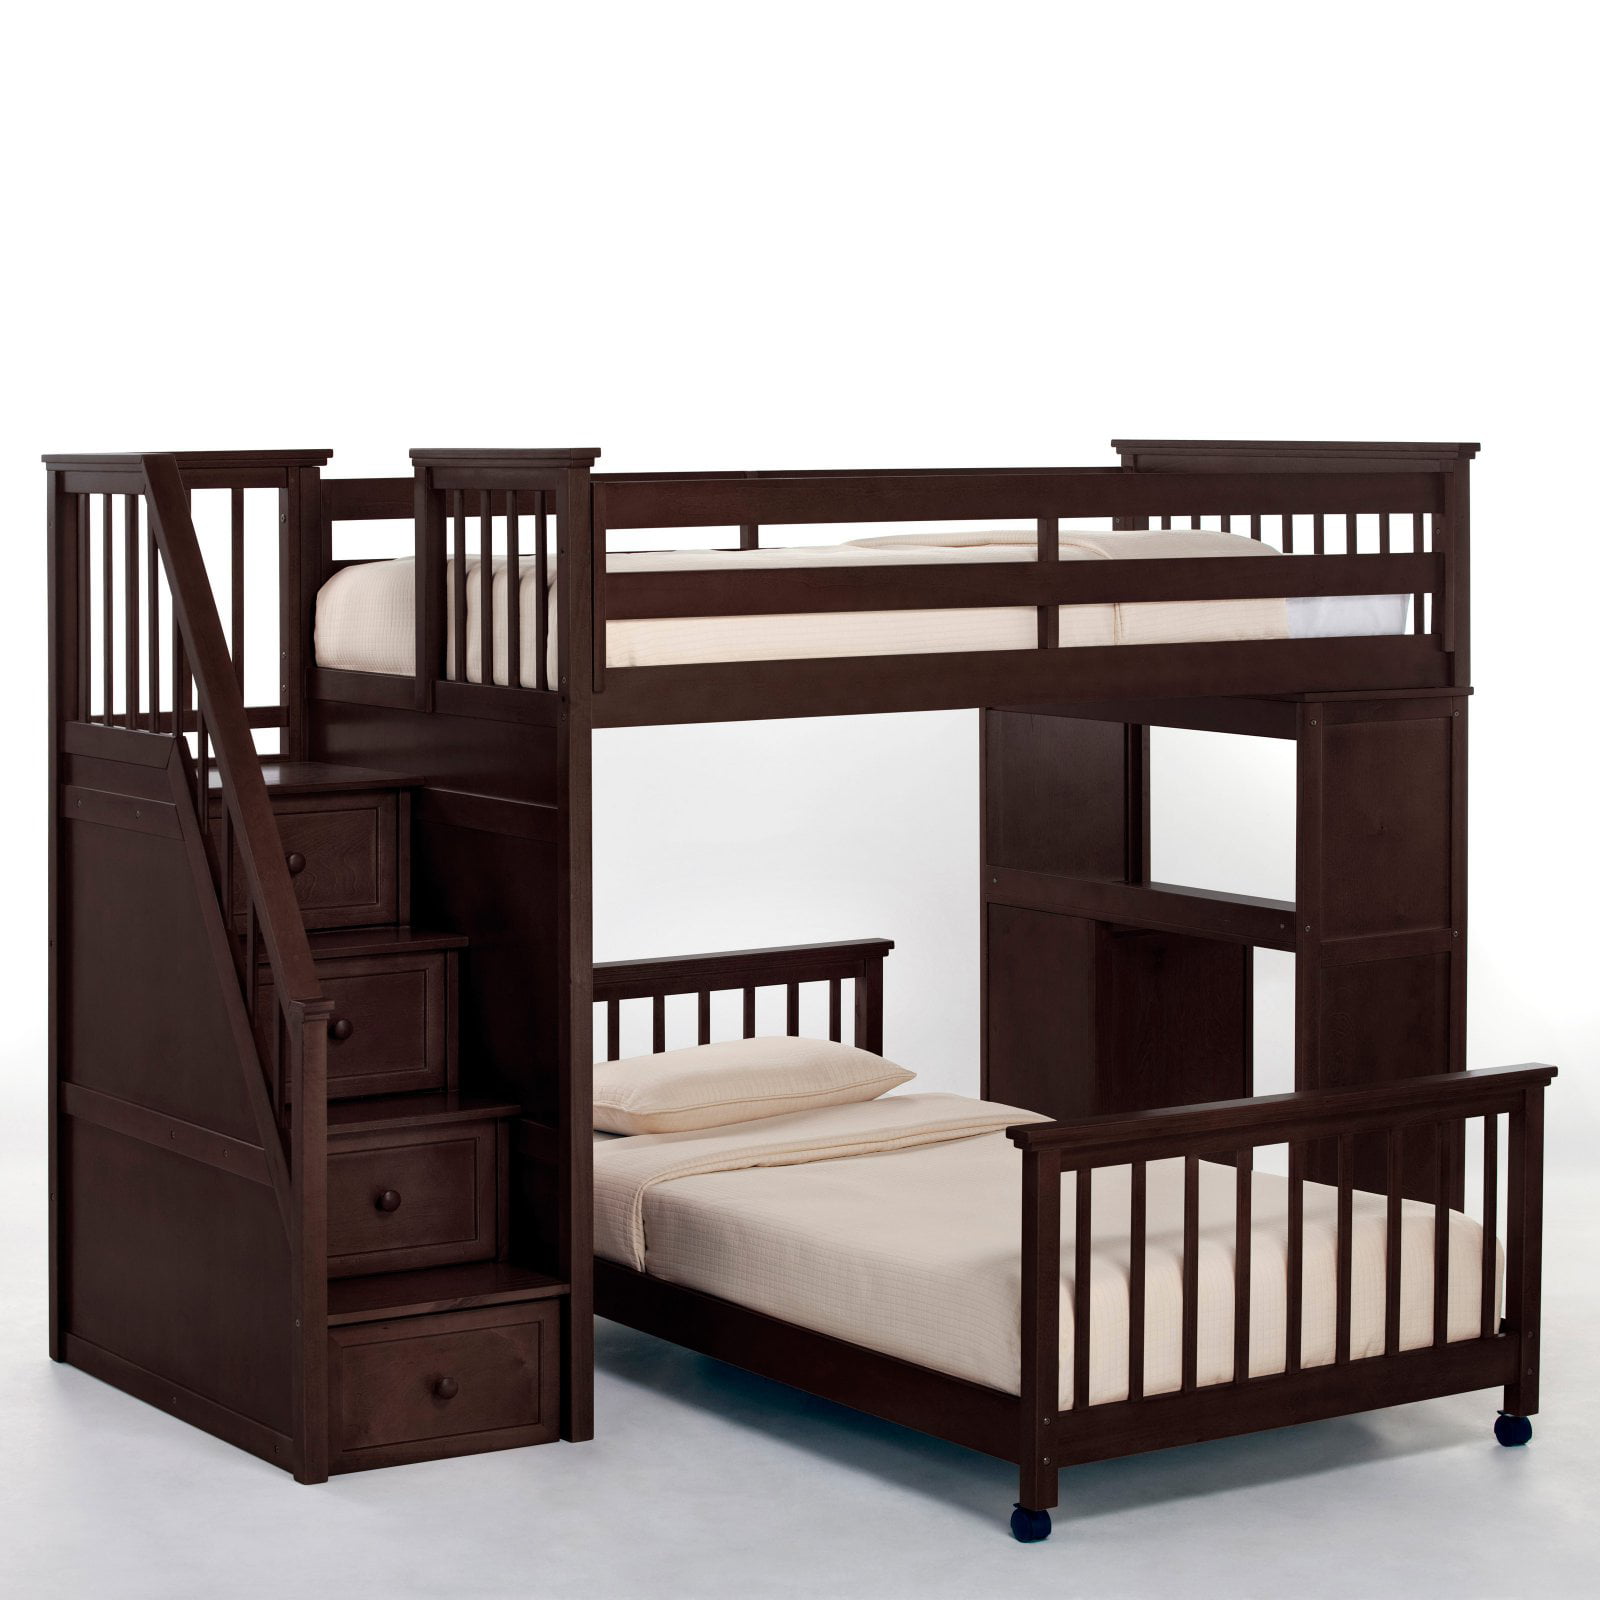 Twin Loft Bed In Antique Gray, American Woodcrafters Stonebrook Bunk Beds